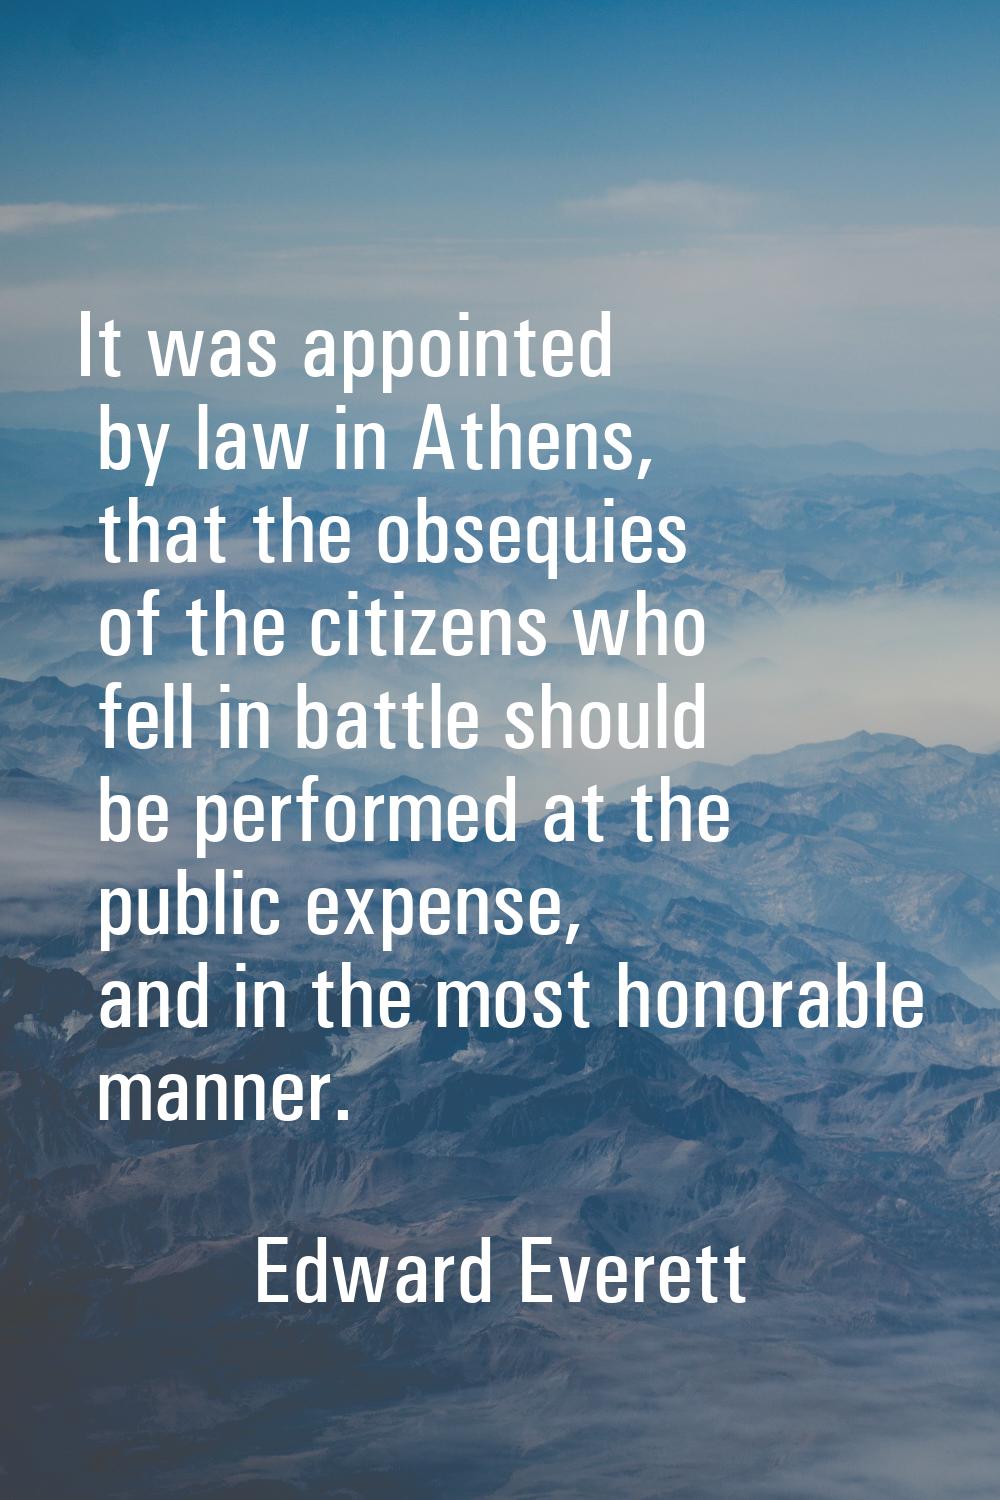 It was appointed by law in Athens, that the obsequies of the citizens who fell in battle should be 